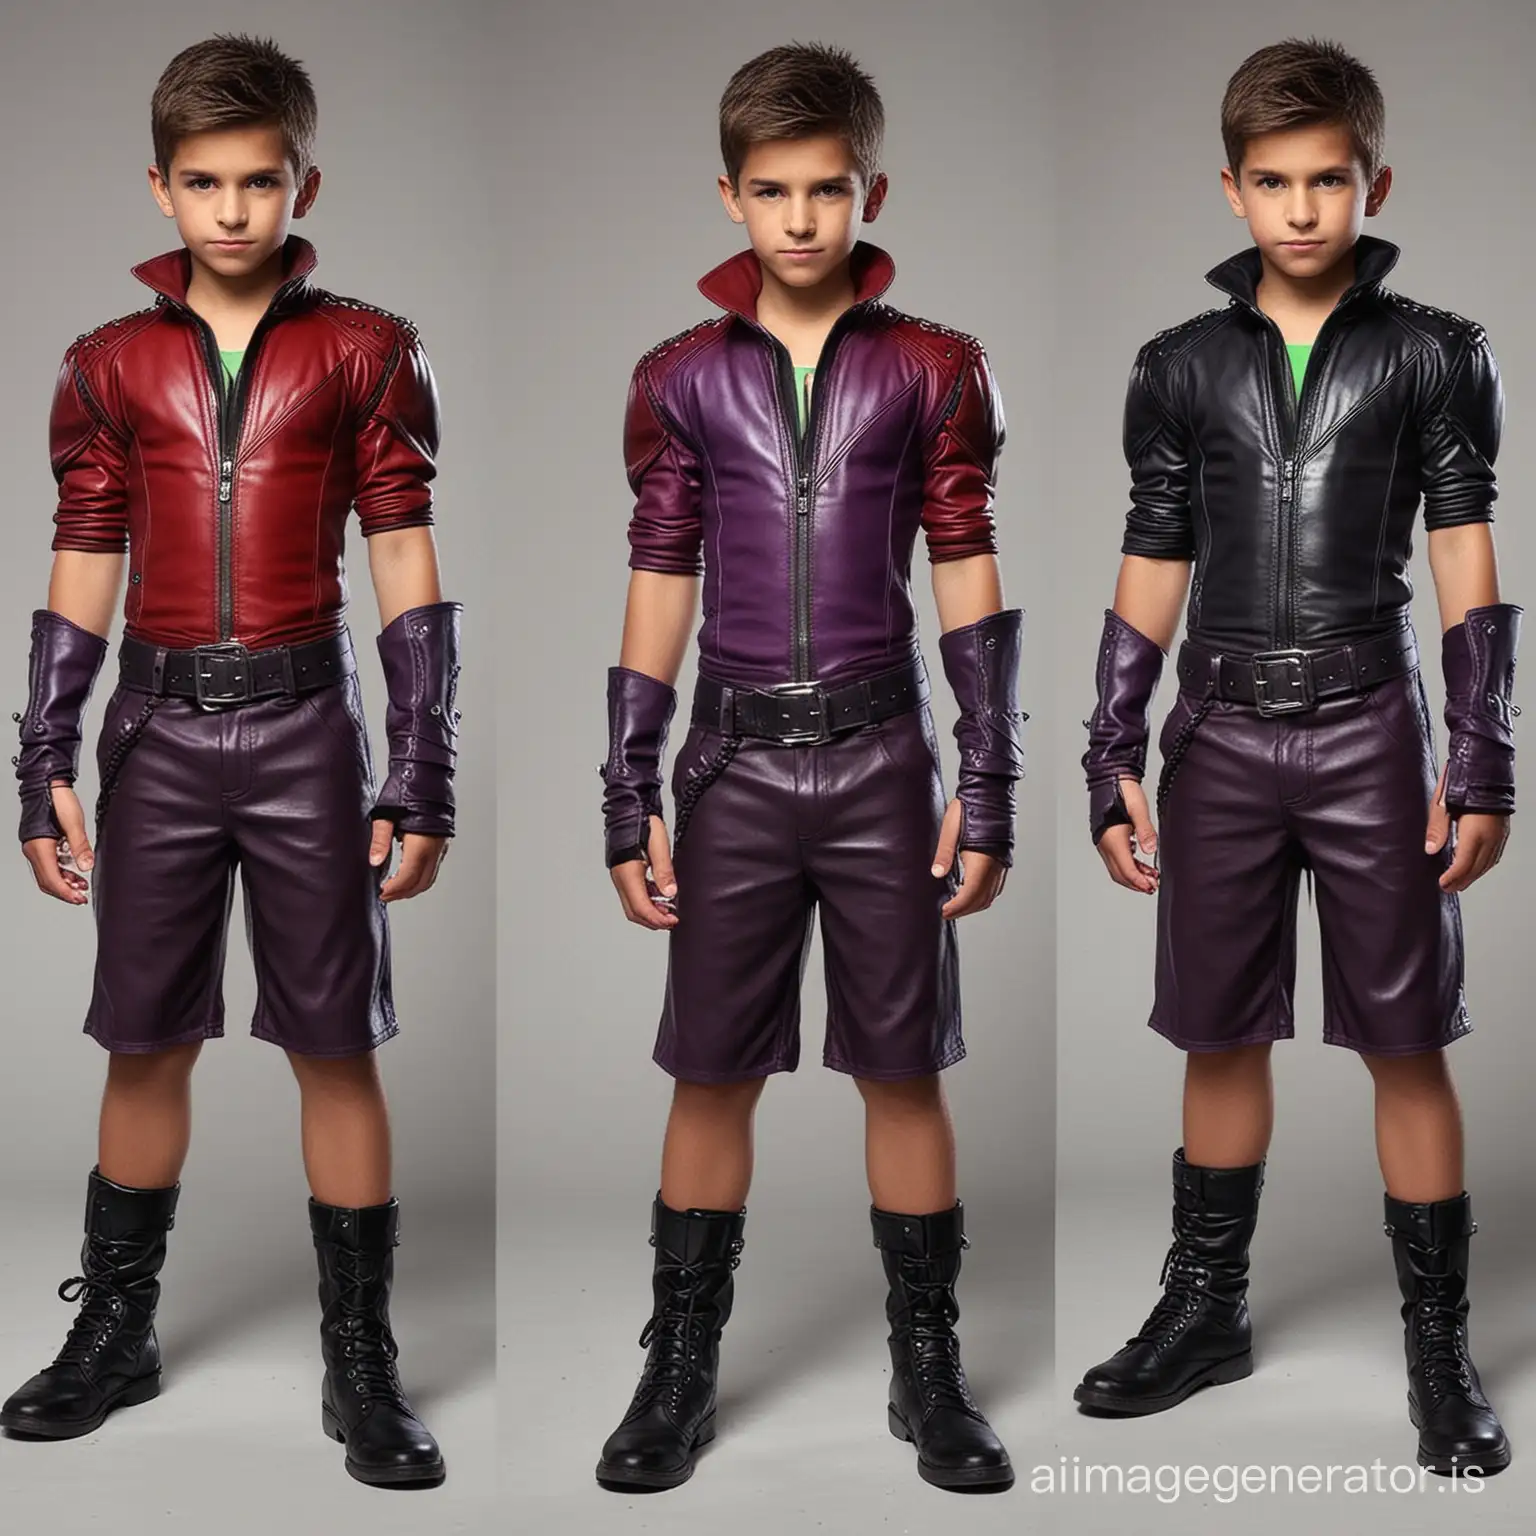 Create a villain outfit for a strong 8 year old boy villain with abs, cool,  wicked, leather,  shorts,  comfortable yet intimidating, various shades of purple with hints of both green and red, both red and green should be included in every outfit but purple should be the main color